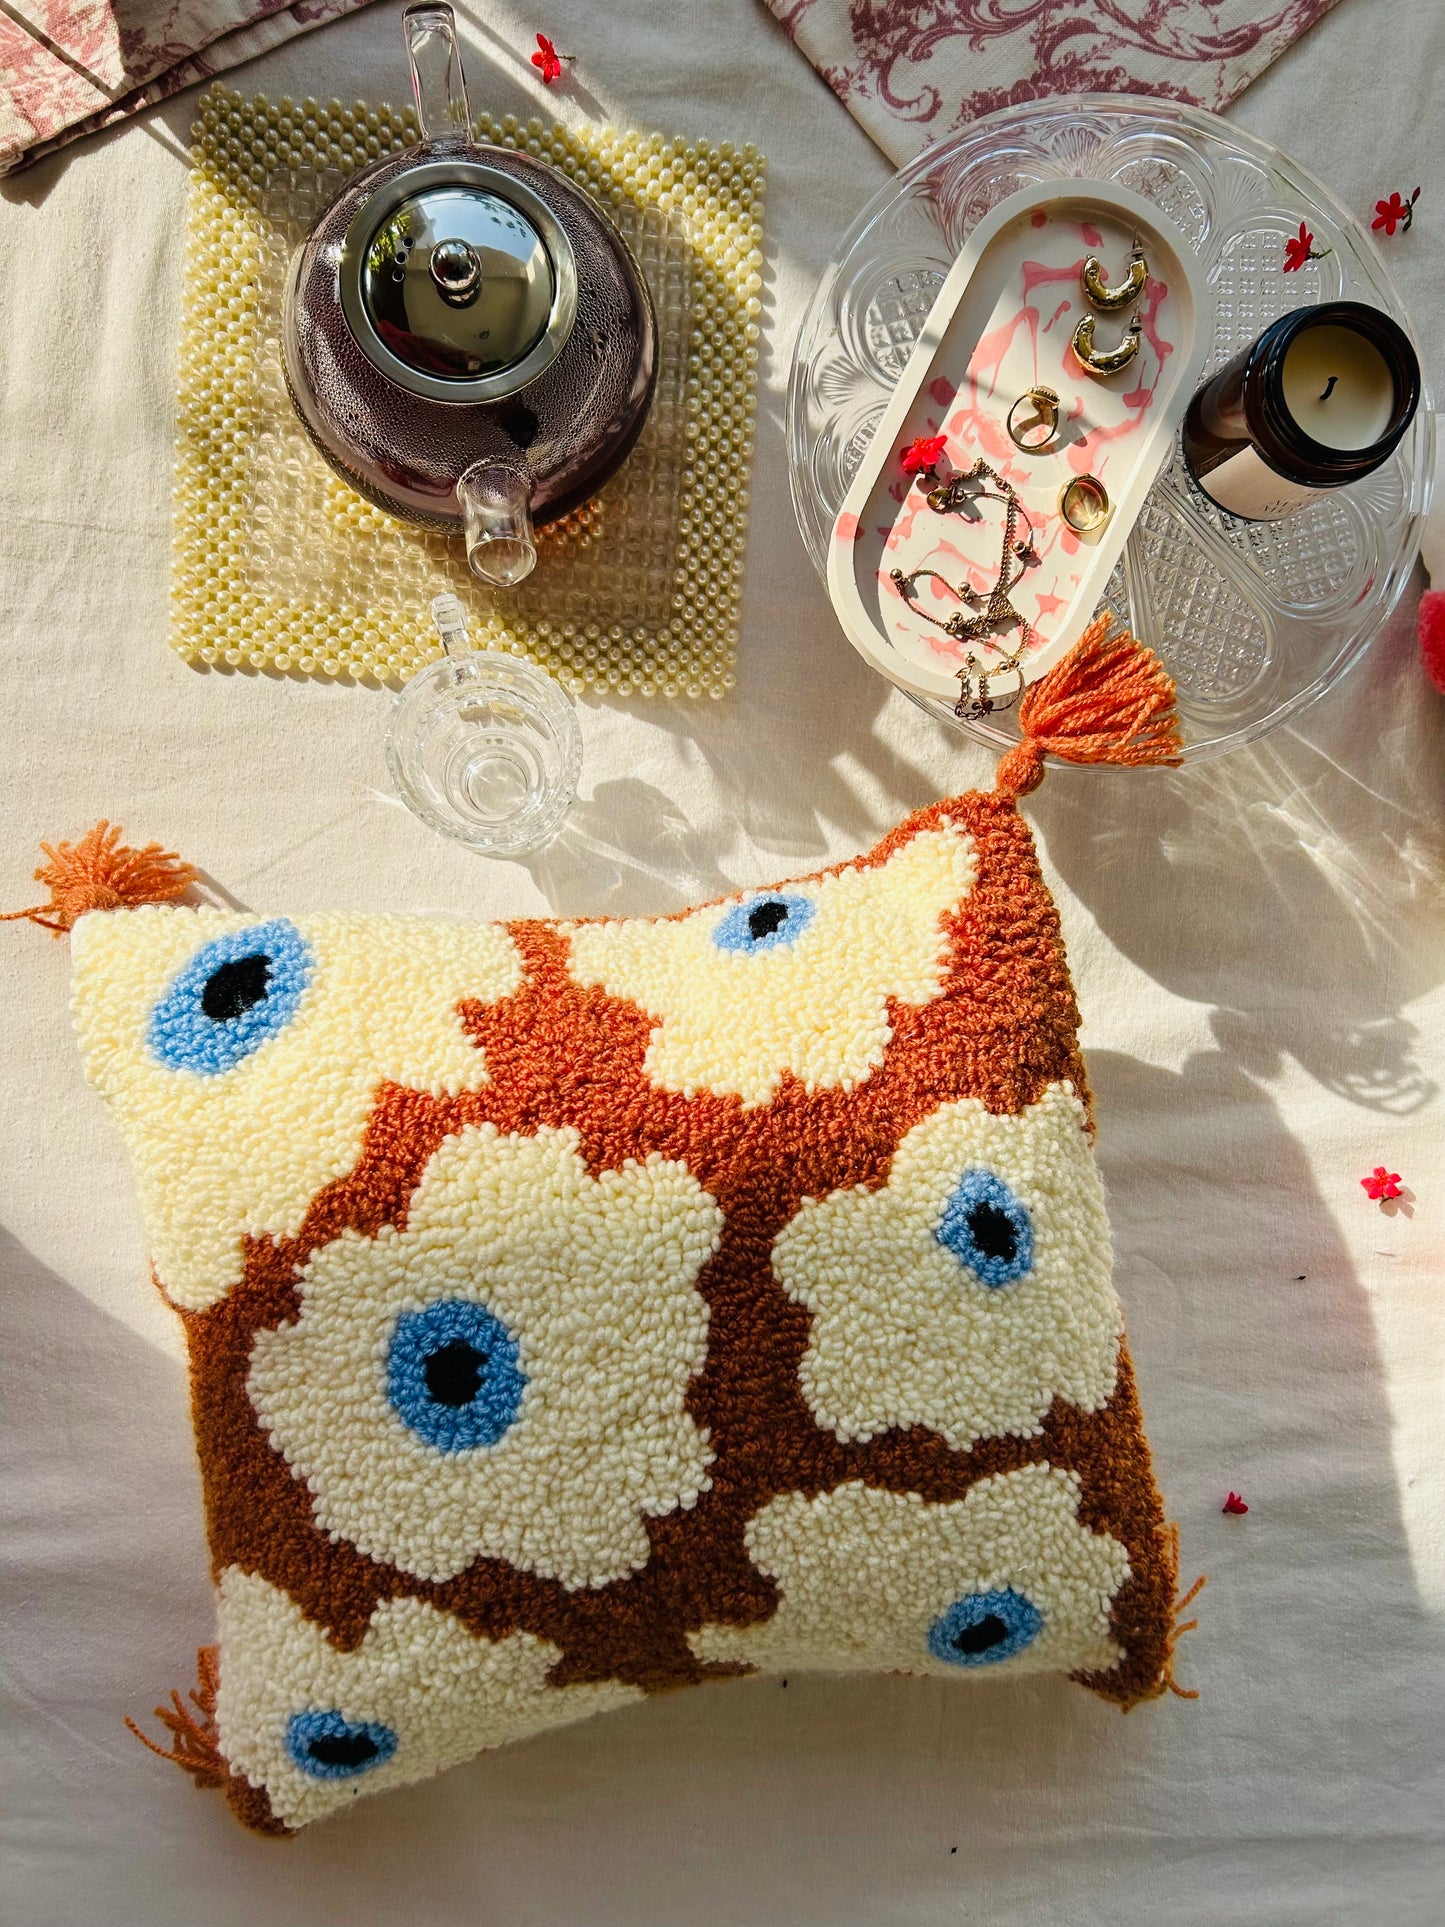 Punch Needle Cushion Cover